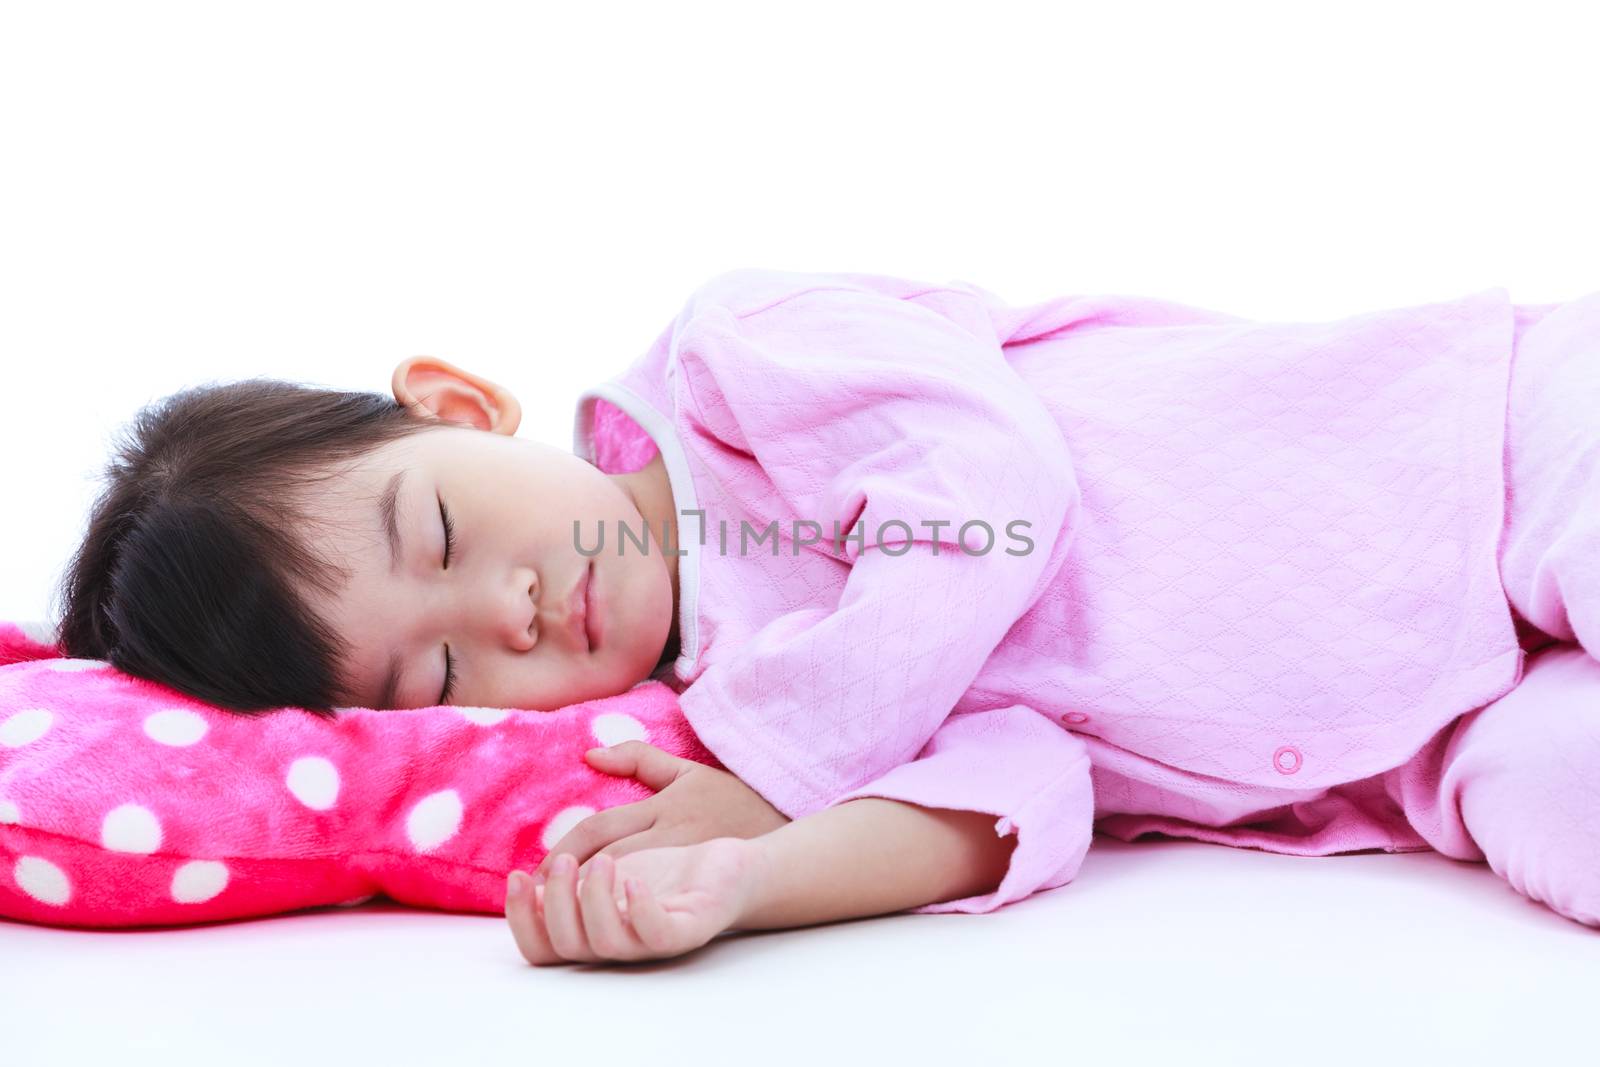 Healthy children concept. Asian girl sleeping peacefully. Isolat by kdshutterman